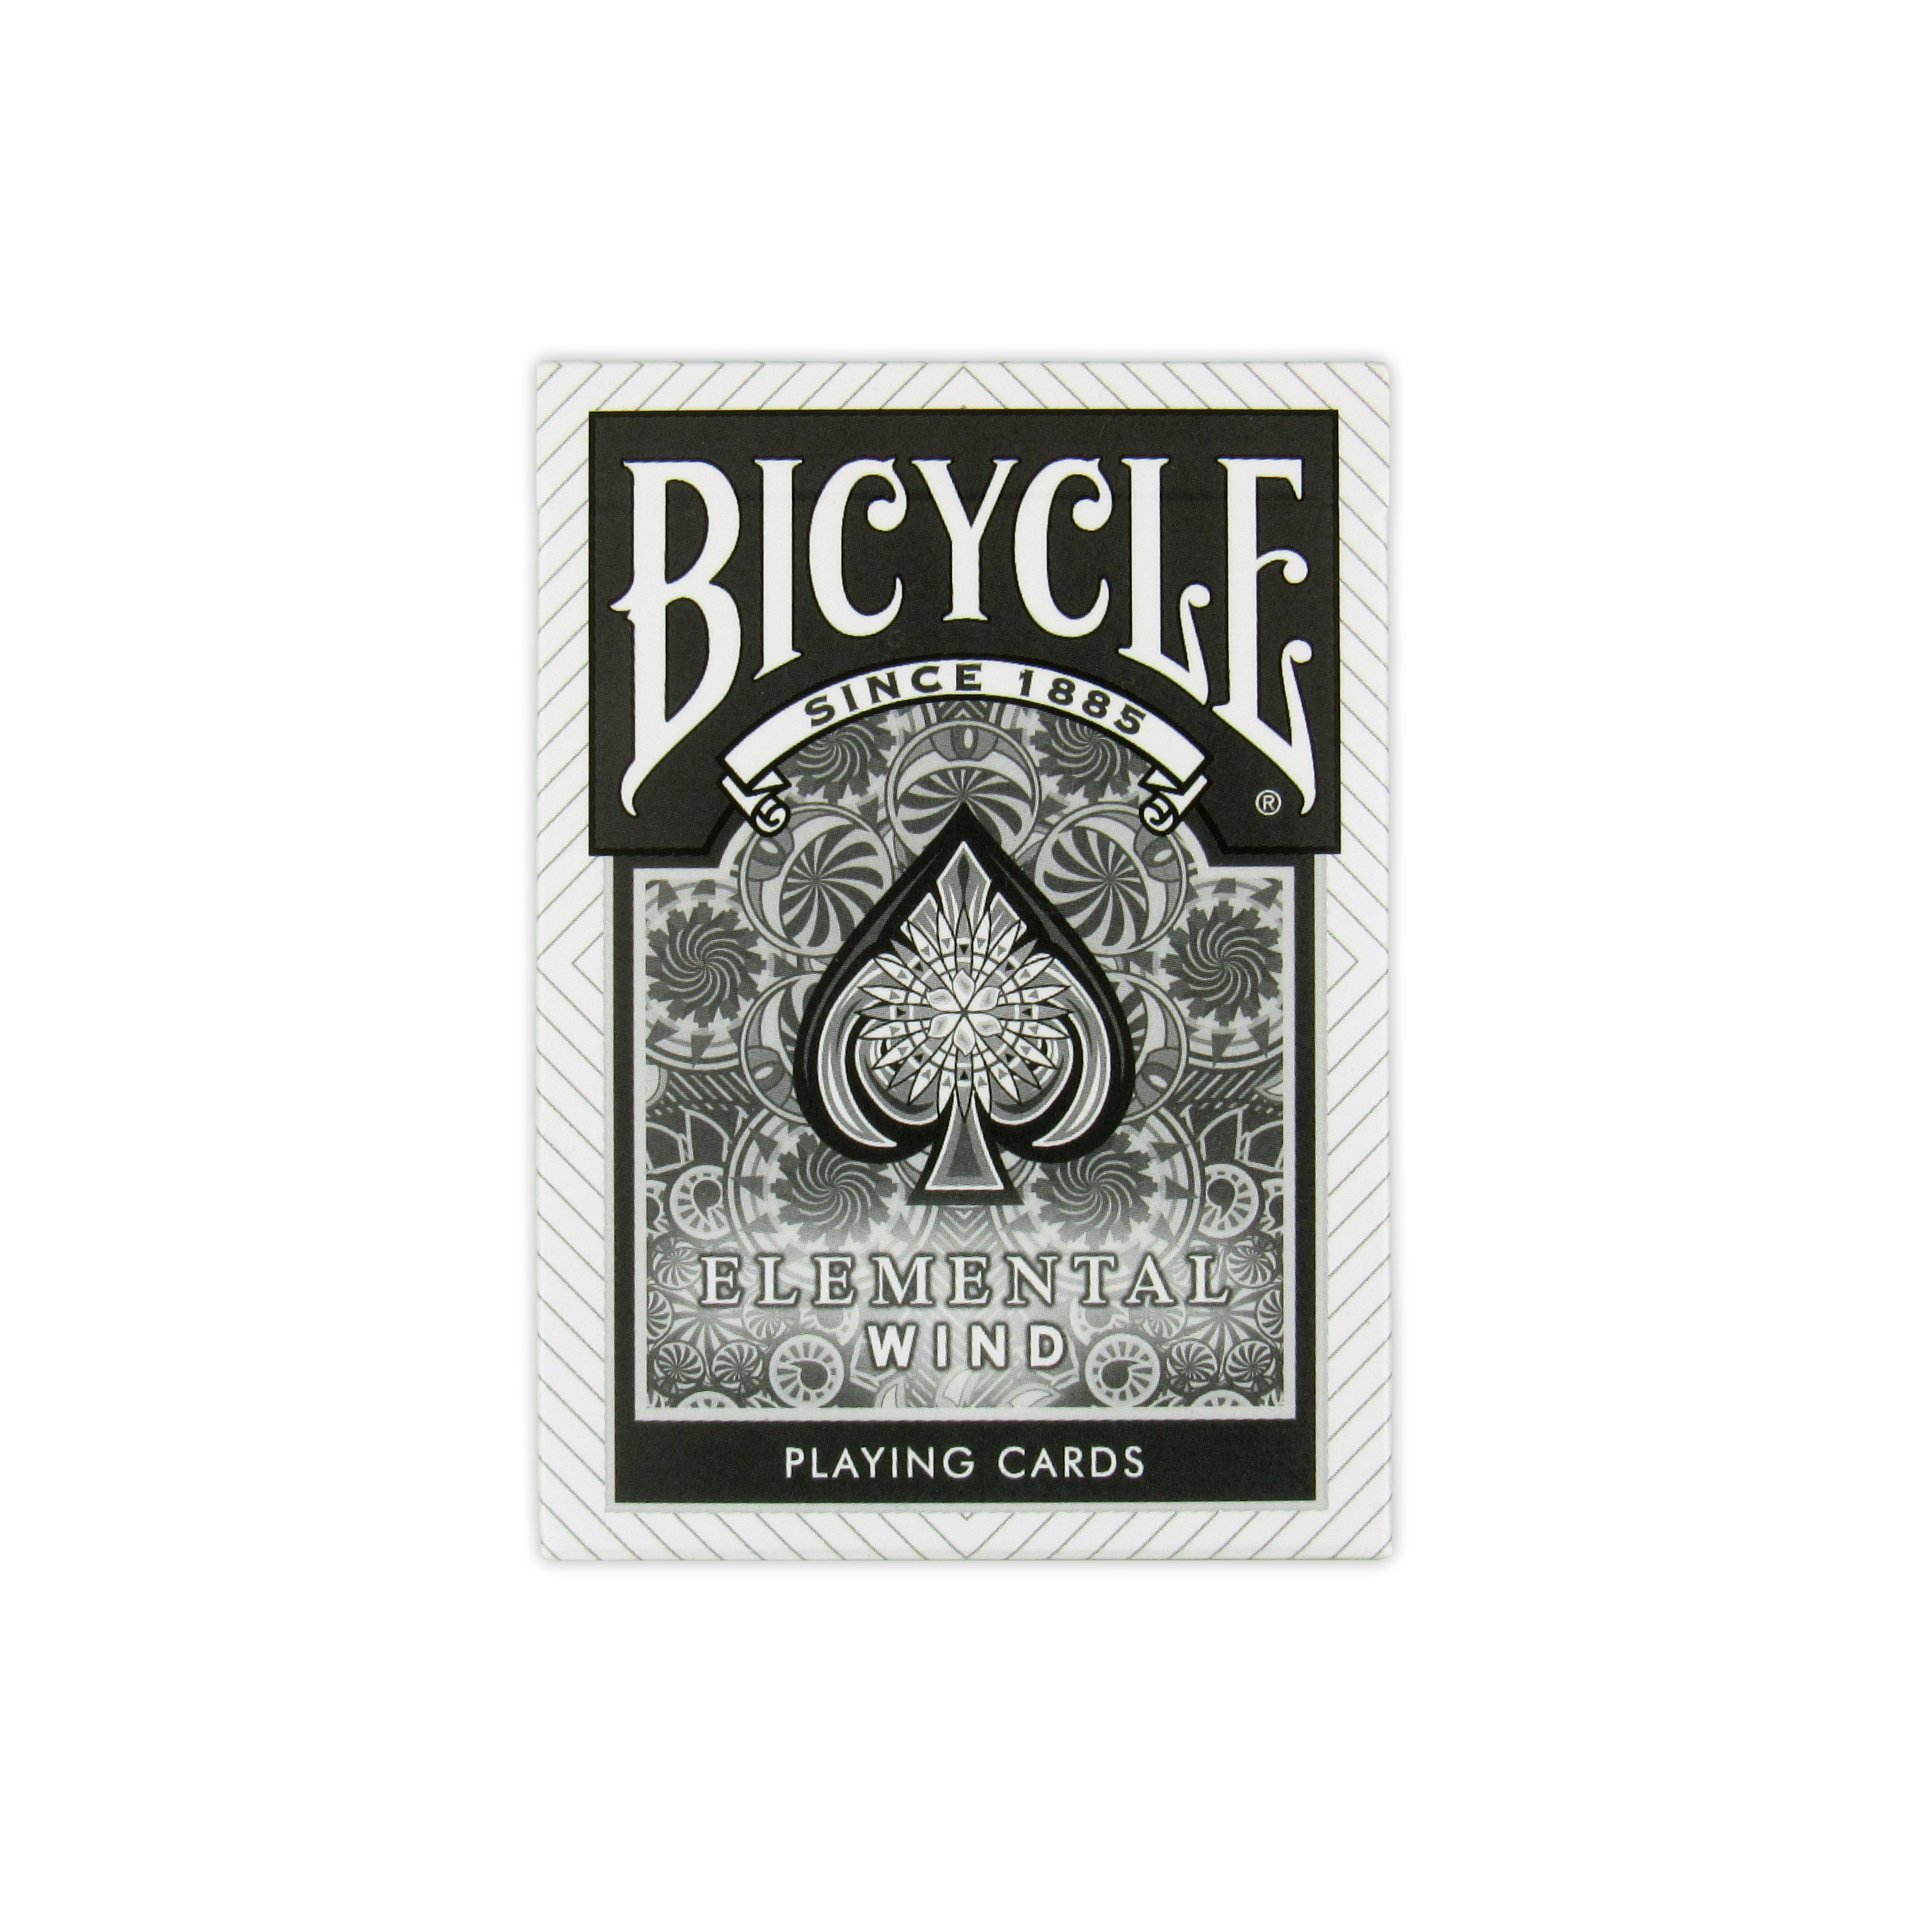 Bicycle Utopia White and Gold Playing Cards Deck Brand New 